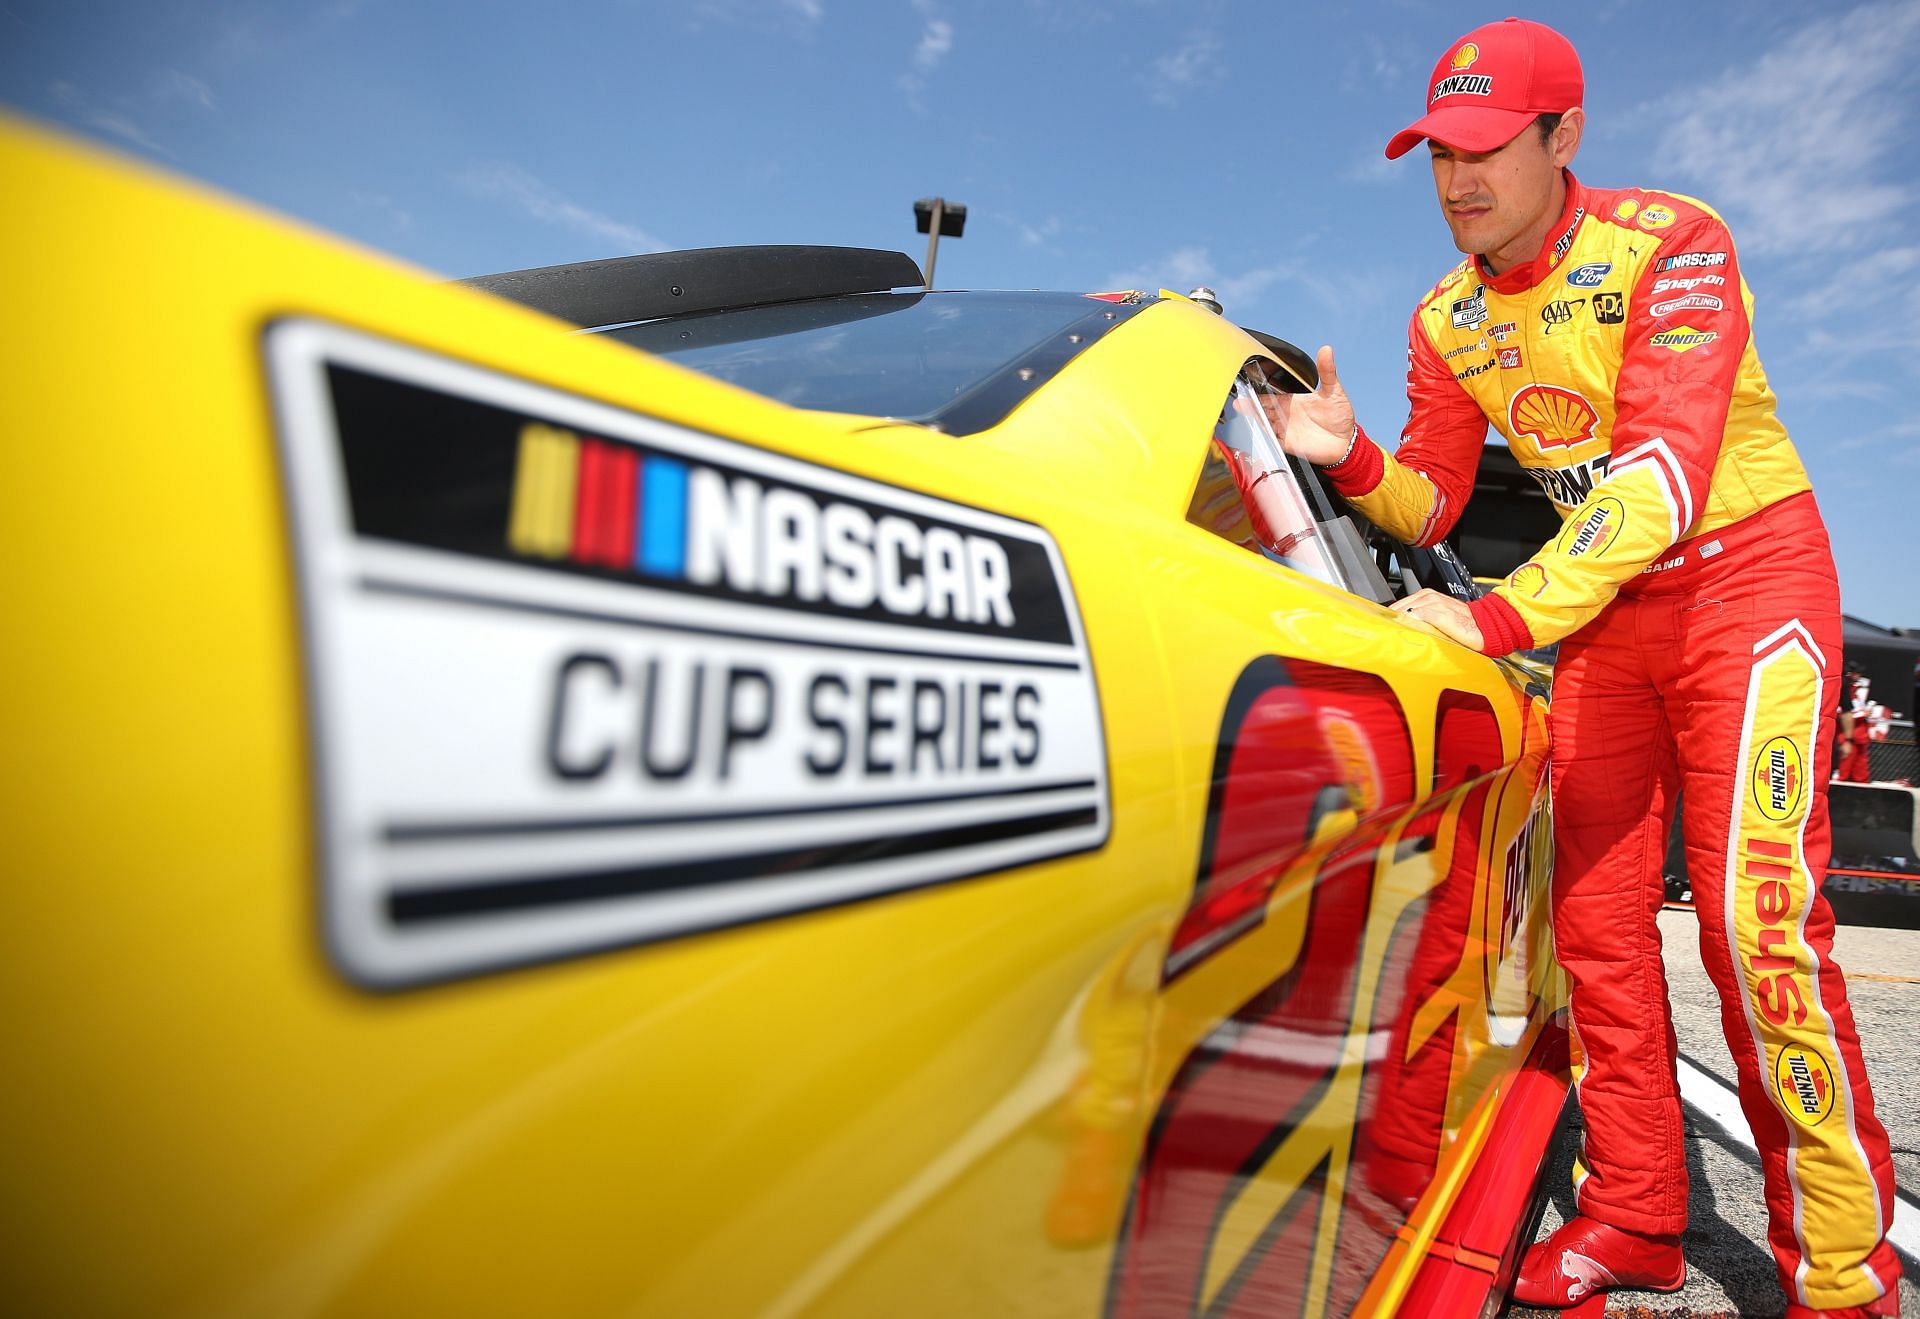 Joey Logano prepares to practice for the 2022 NASCAR Cup Series Kwik Trip 250 at Road America in Elkhart Lake, Wisconsin. (Photo by Sean Gardner/Getty Images)